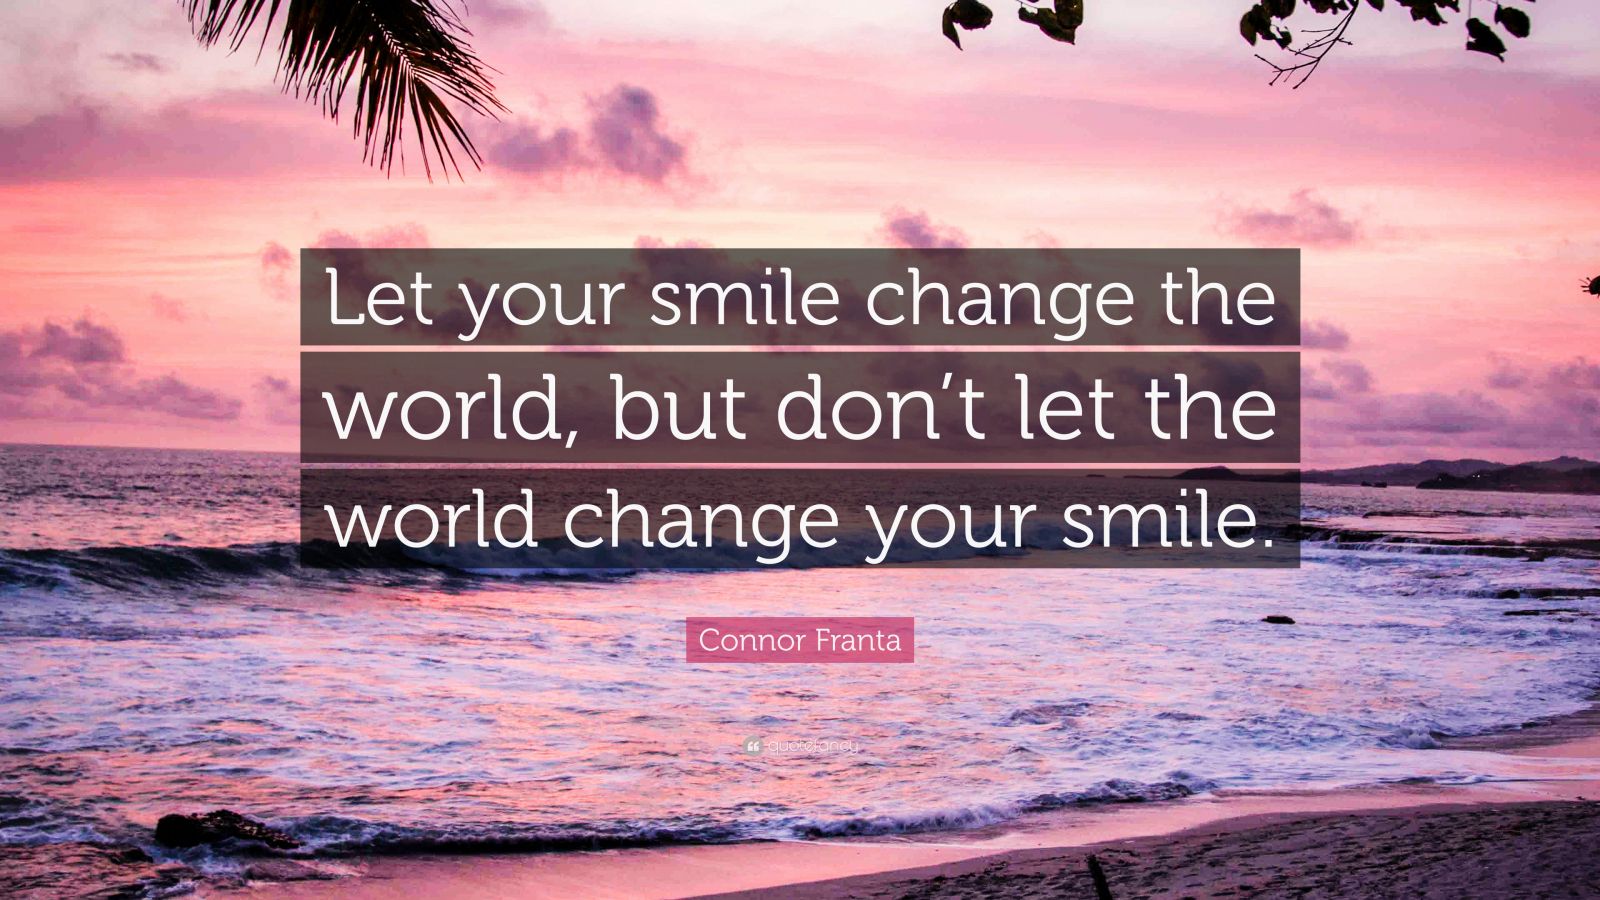 Connor Franta Quote: “Let your smile change the world, but don't let the  world change your smile.”